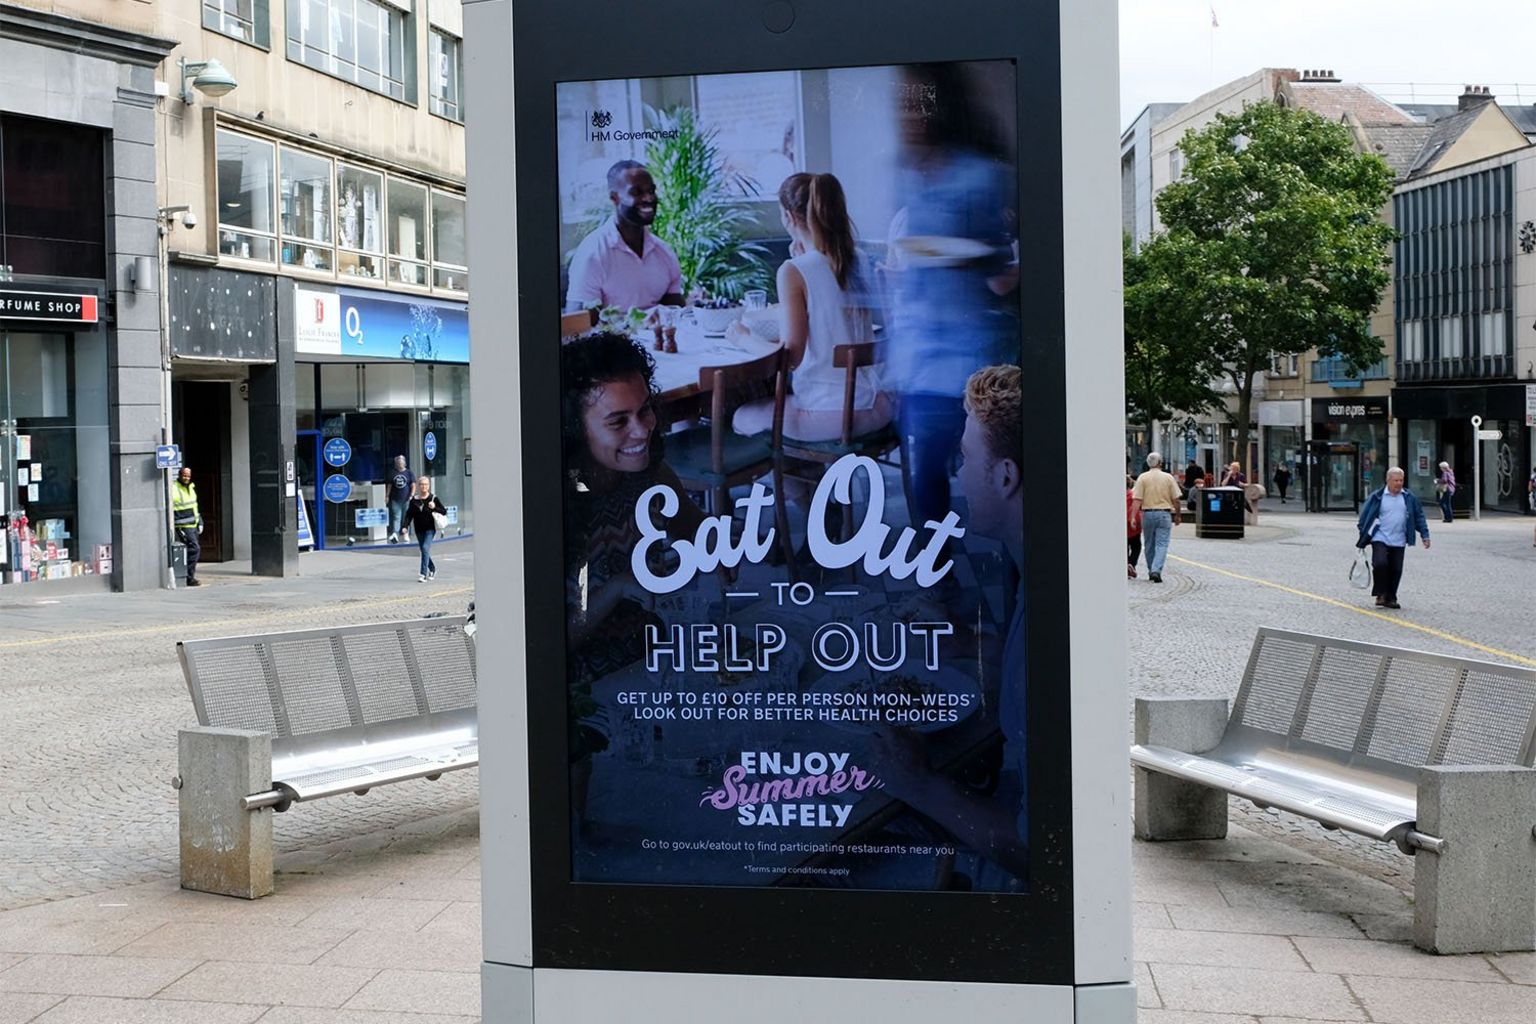 Advert for the Eat Out to Help Out scheme, Sheffield, August 2020